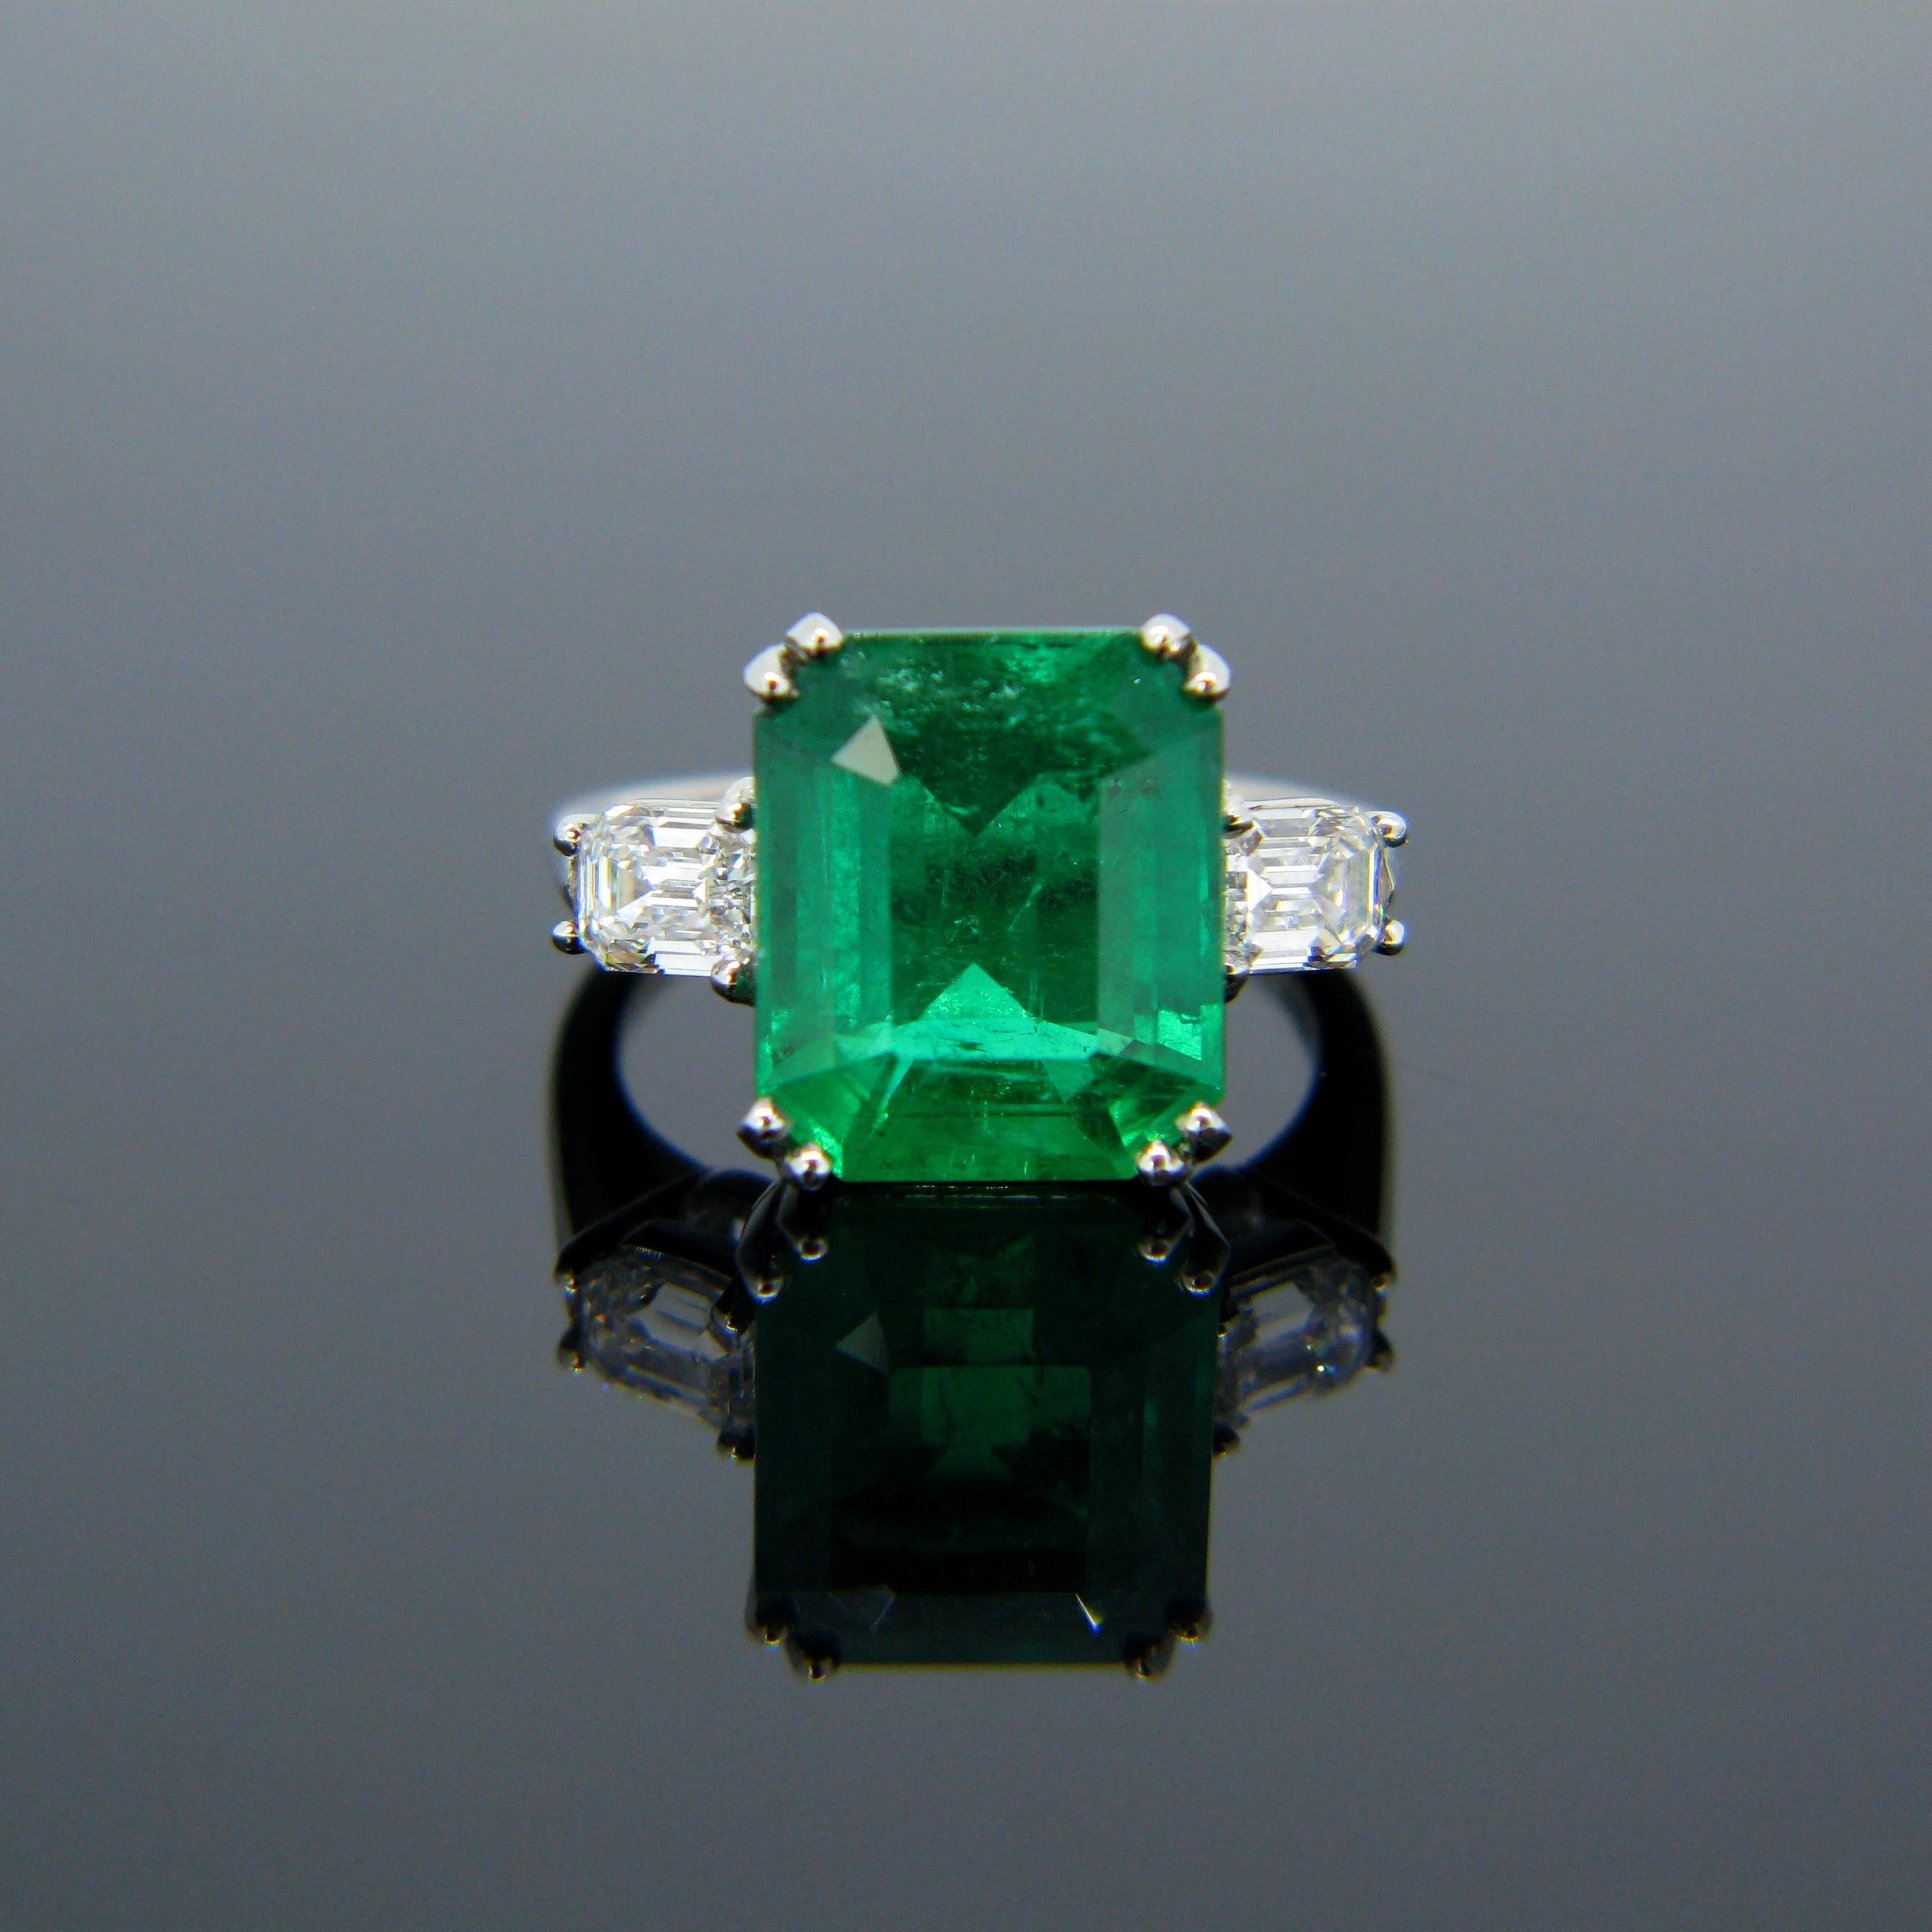 This stunning new ring is made in platinum and features a magnificent 6.05ct Colombian emerald with a vibrant green color. The stone is adorned with two diamonds (one on each side) weighing approximately 0.40ct each. Emerald is also known as the